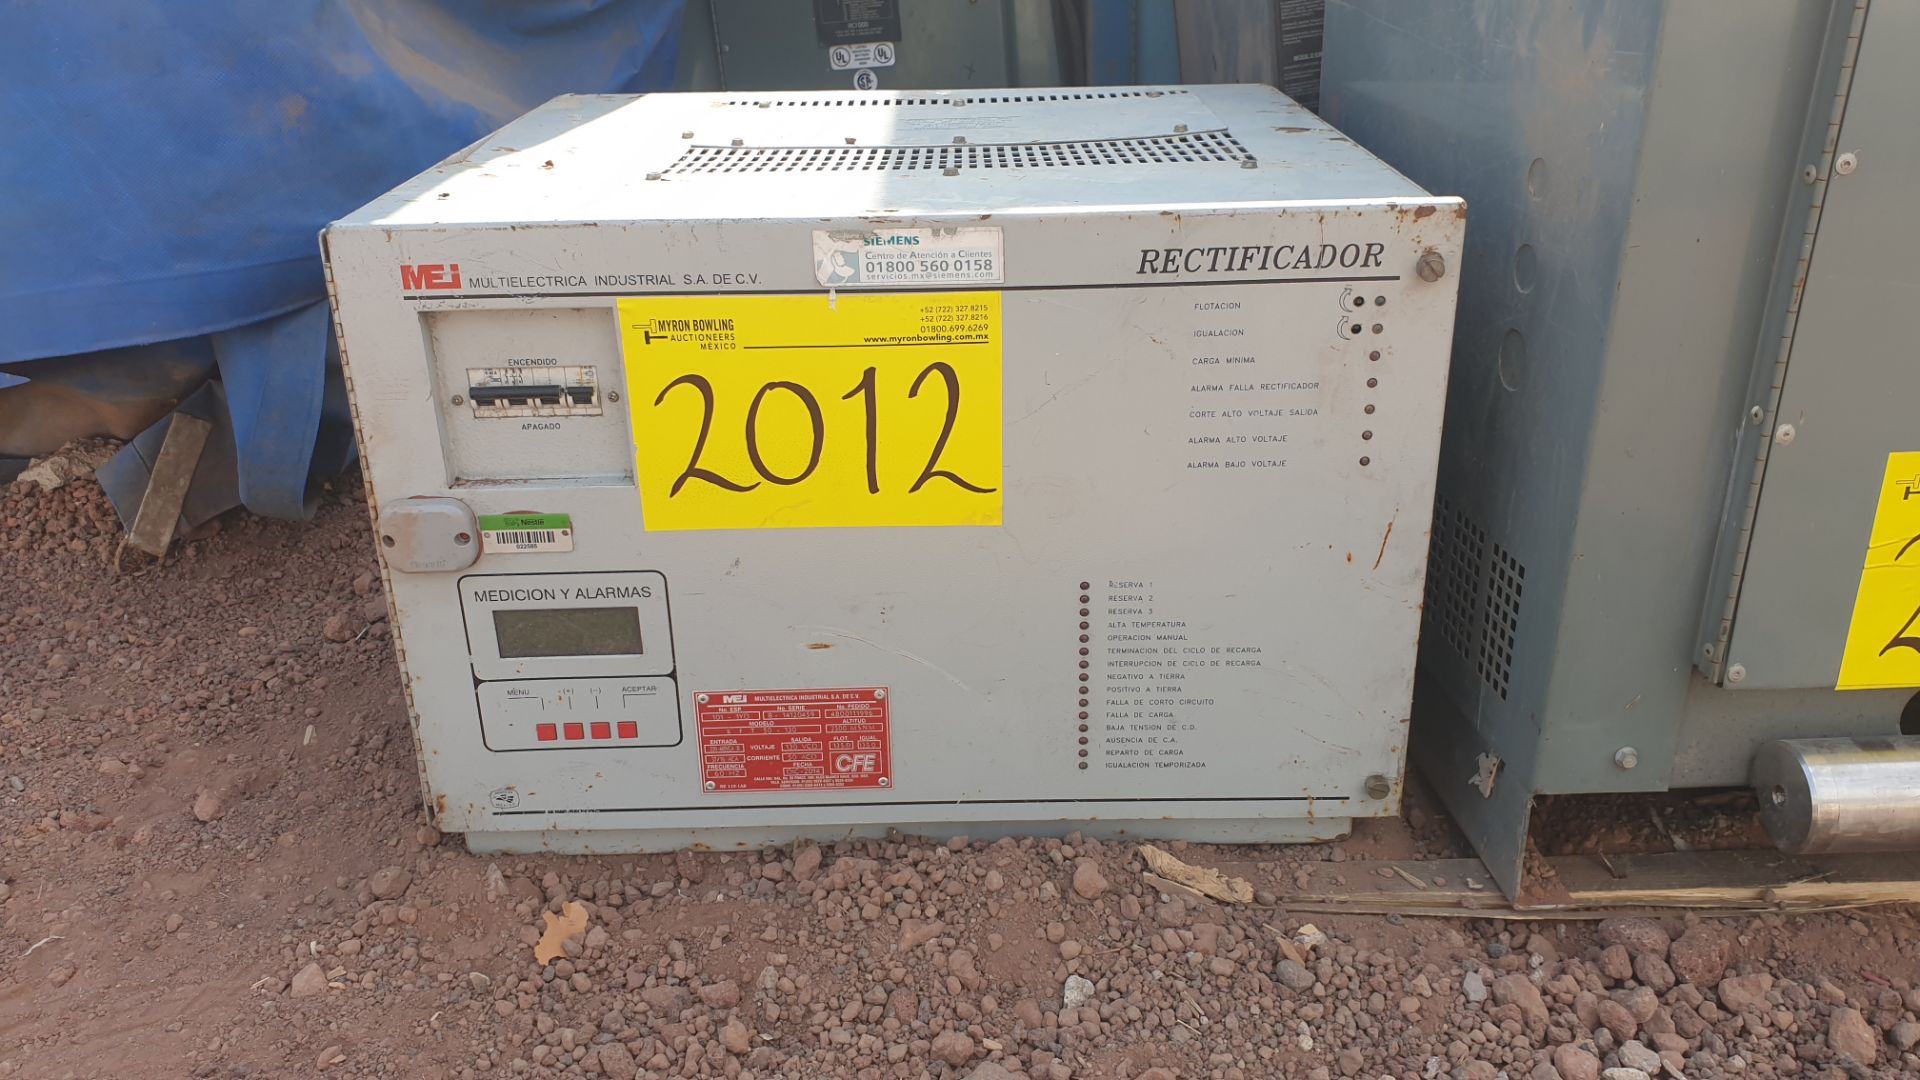 1 MEI Rectifier charger model KFT50130 N/S B14120459 220-440V year 2014 - Image 10 of 11